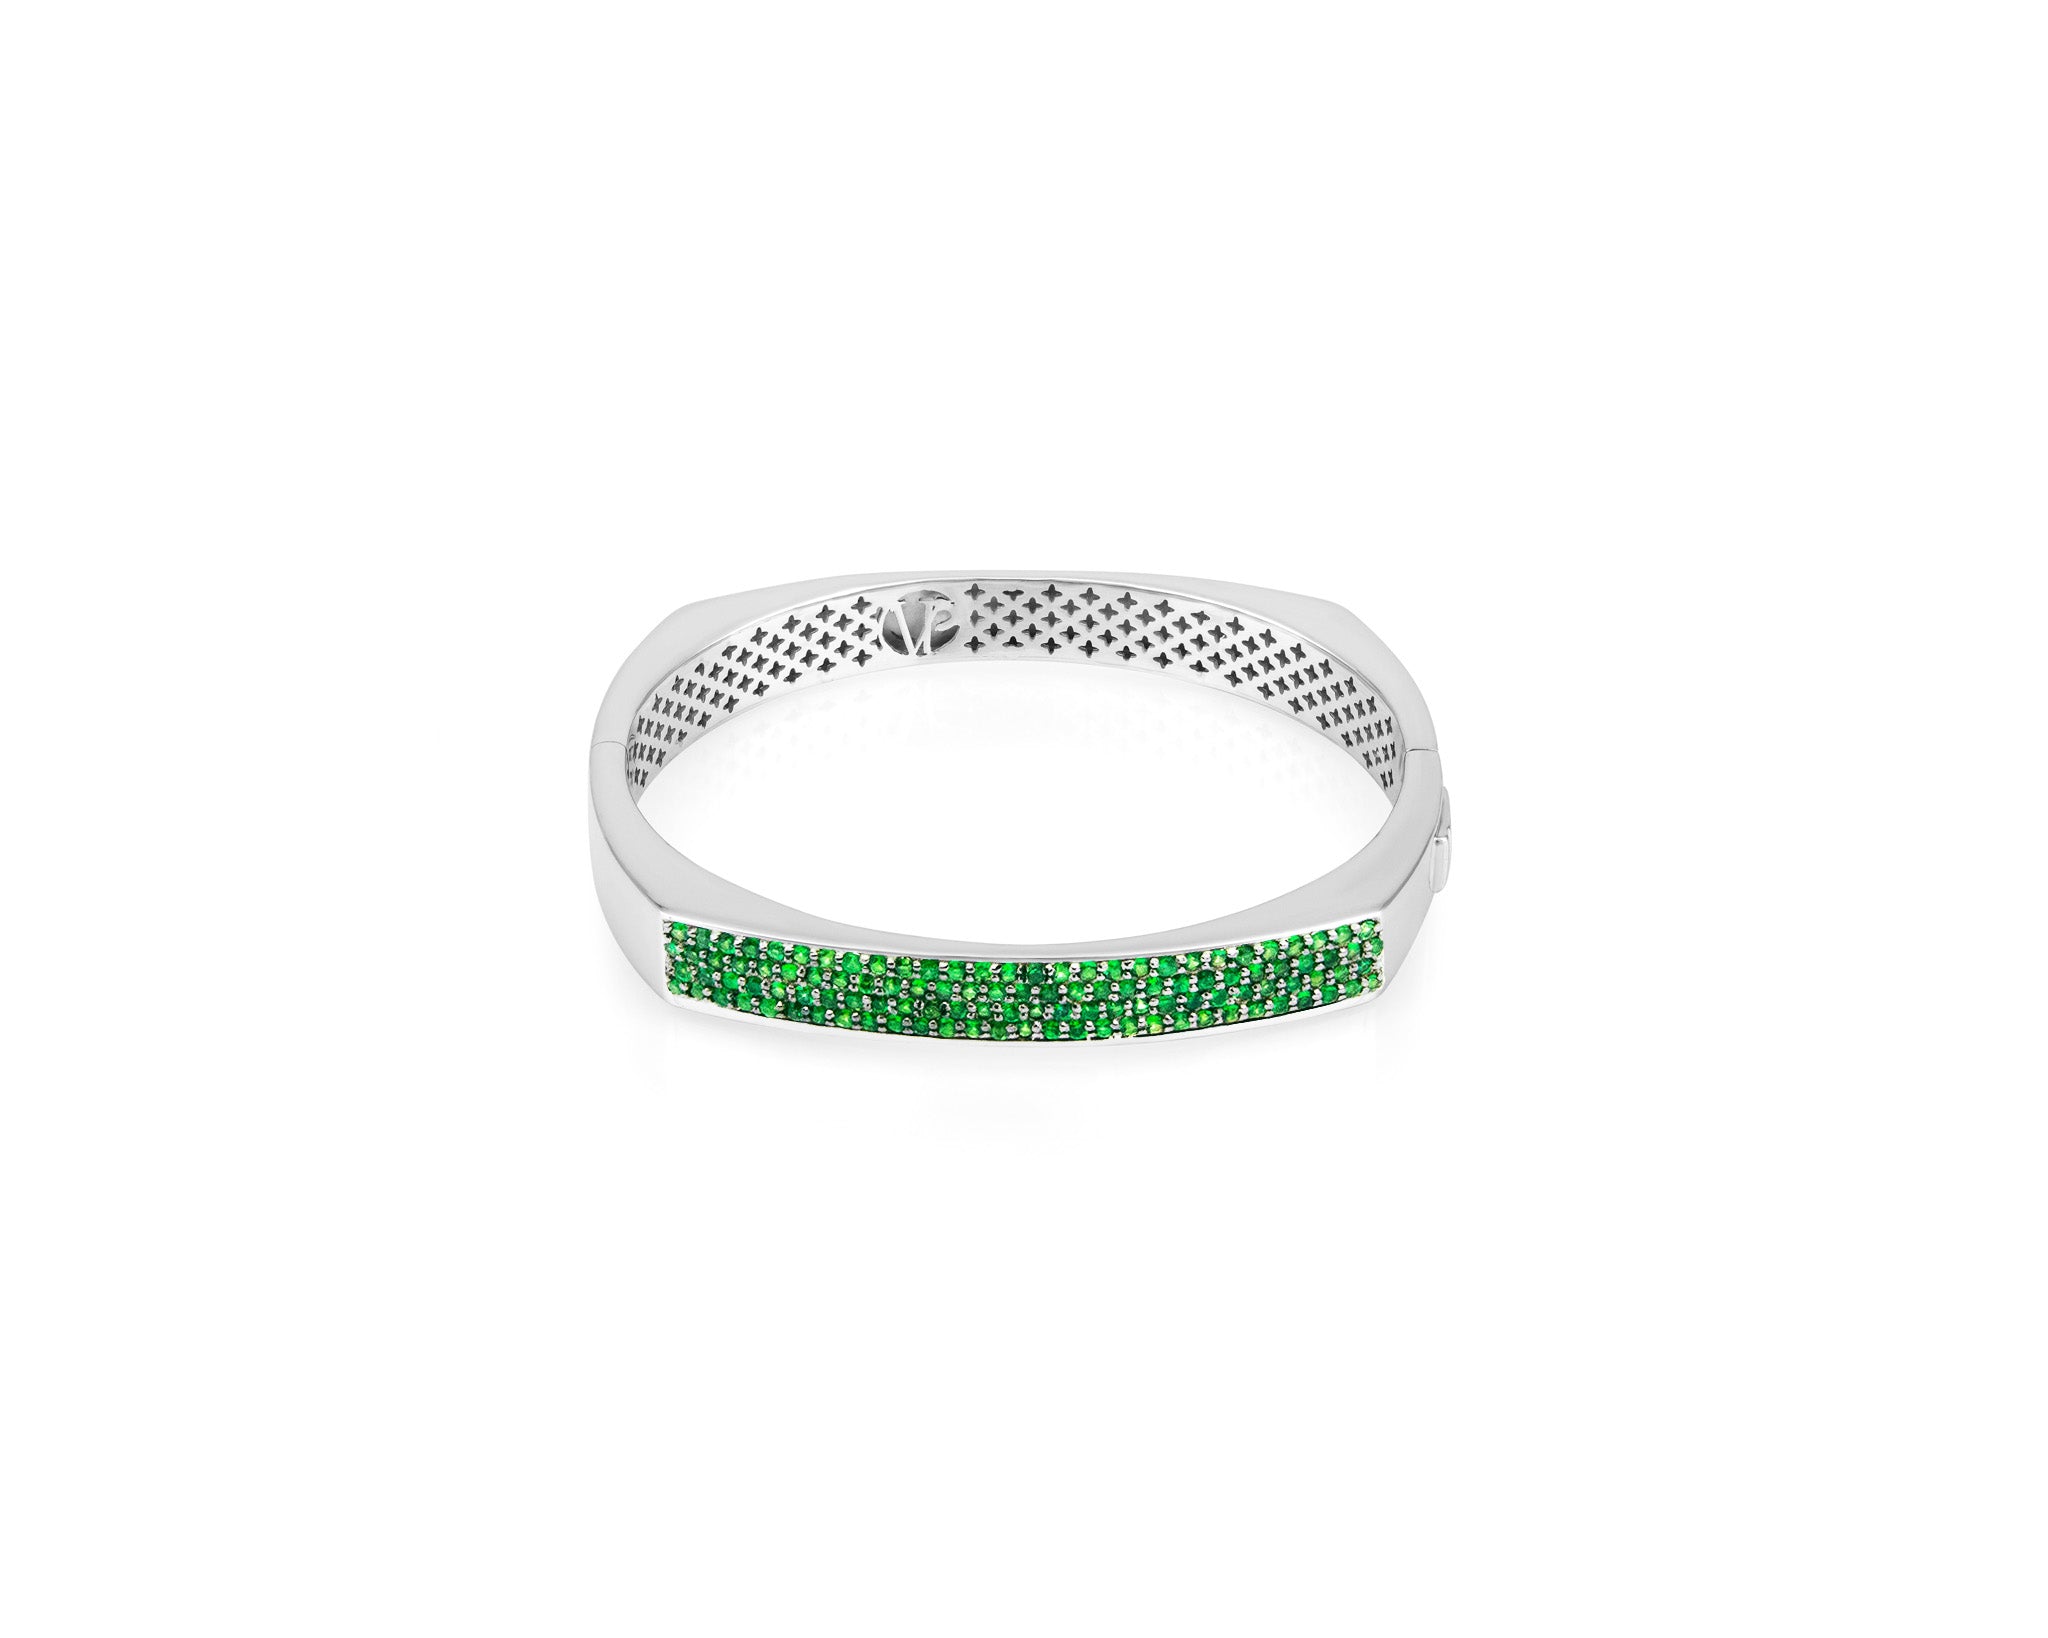 Women’s Toulouse Bangle In Natural Tsavorite Gemstone With Solid Sterling Silver By Vincent Peach Vincent Peach Fine Jewelry